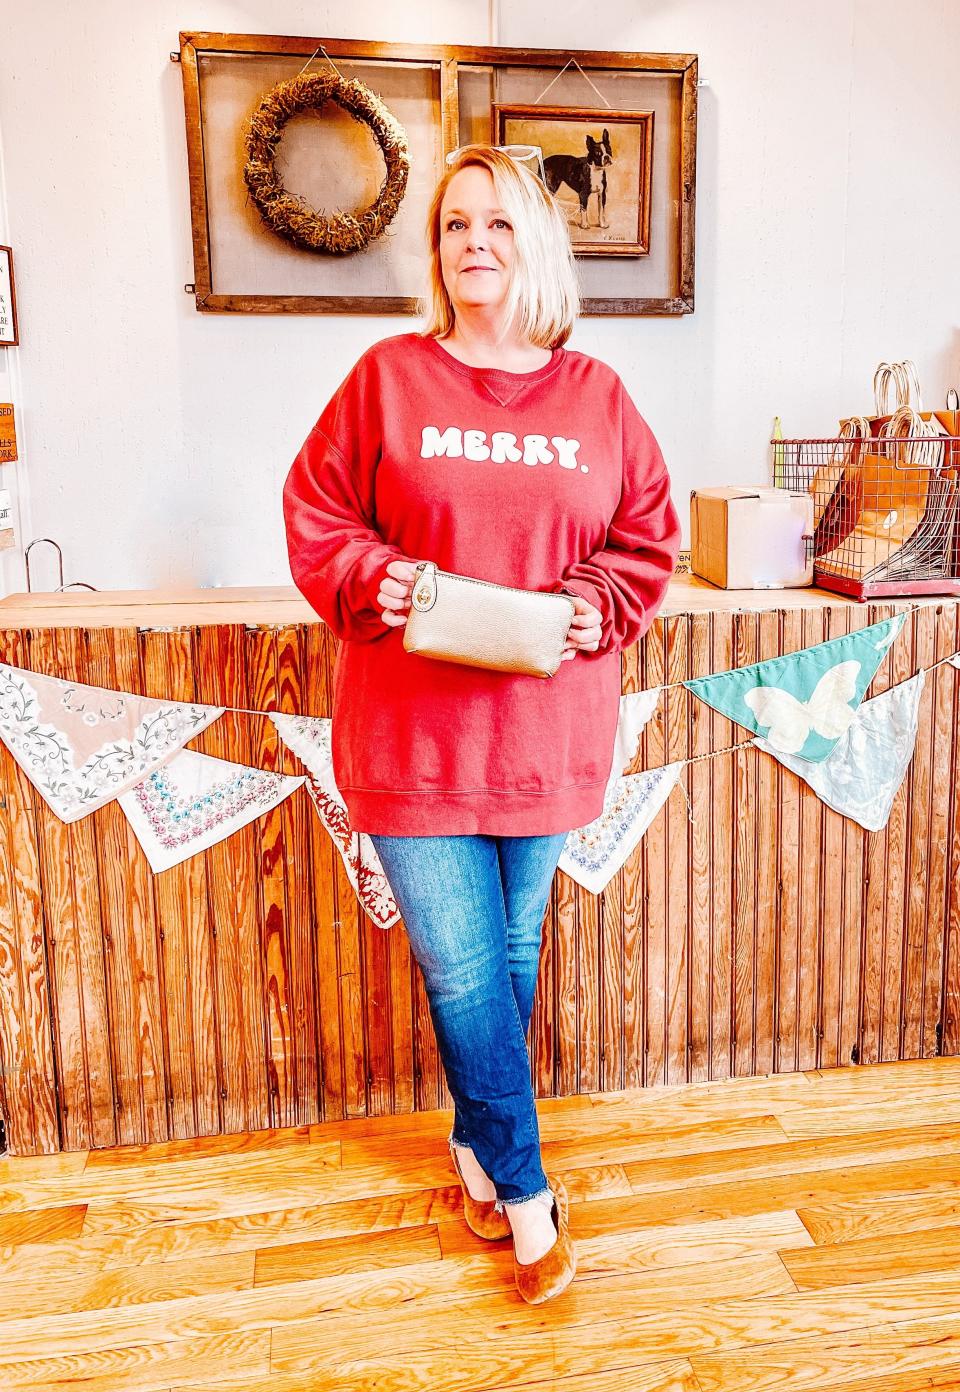 Folly Boutique’s Becky Walker with Aluminum Petunia’s Merry sweatshirt and the wildly popular and practical Jen & Co clutch that comes with a detachable strap. Fountain City, Dec. 8, 2022.